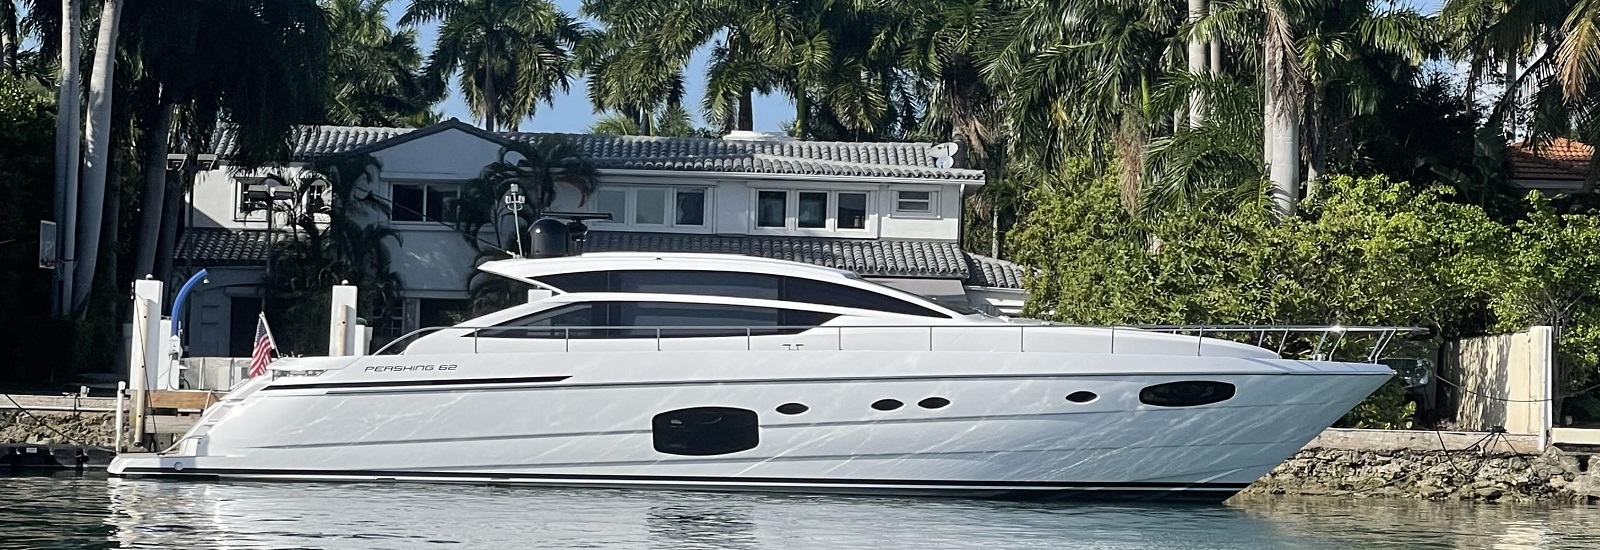 Professional Yacht Brokerage in FL, Buy or Sell